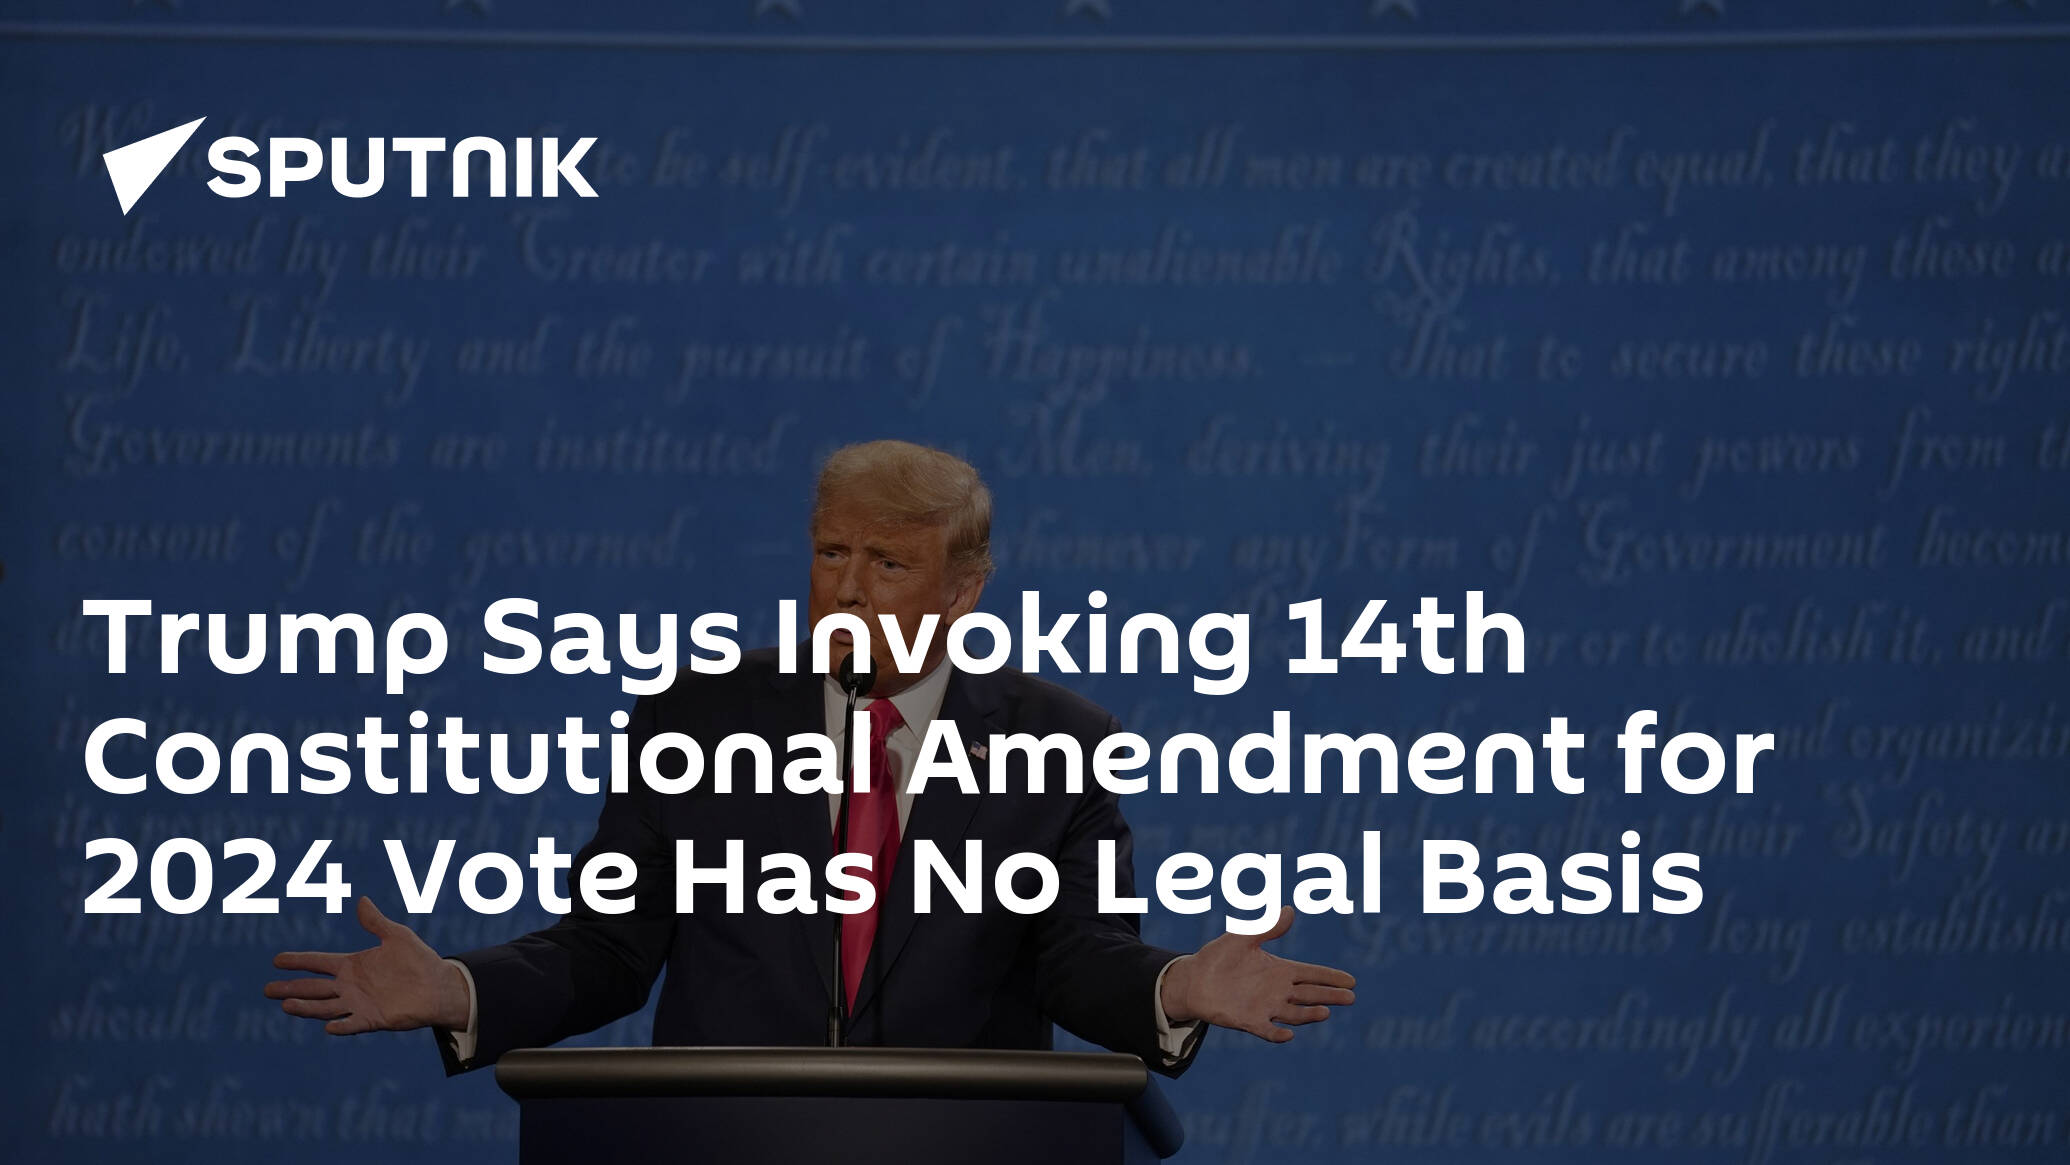 Trump Says Invoking 14th Constitutional Amendment for 2024 Vote Has No Legal Basis